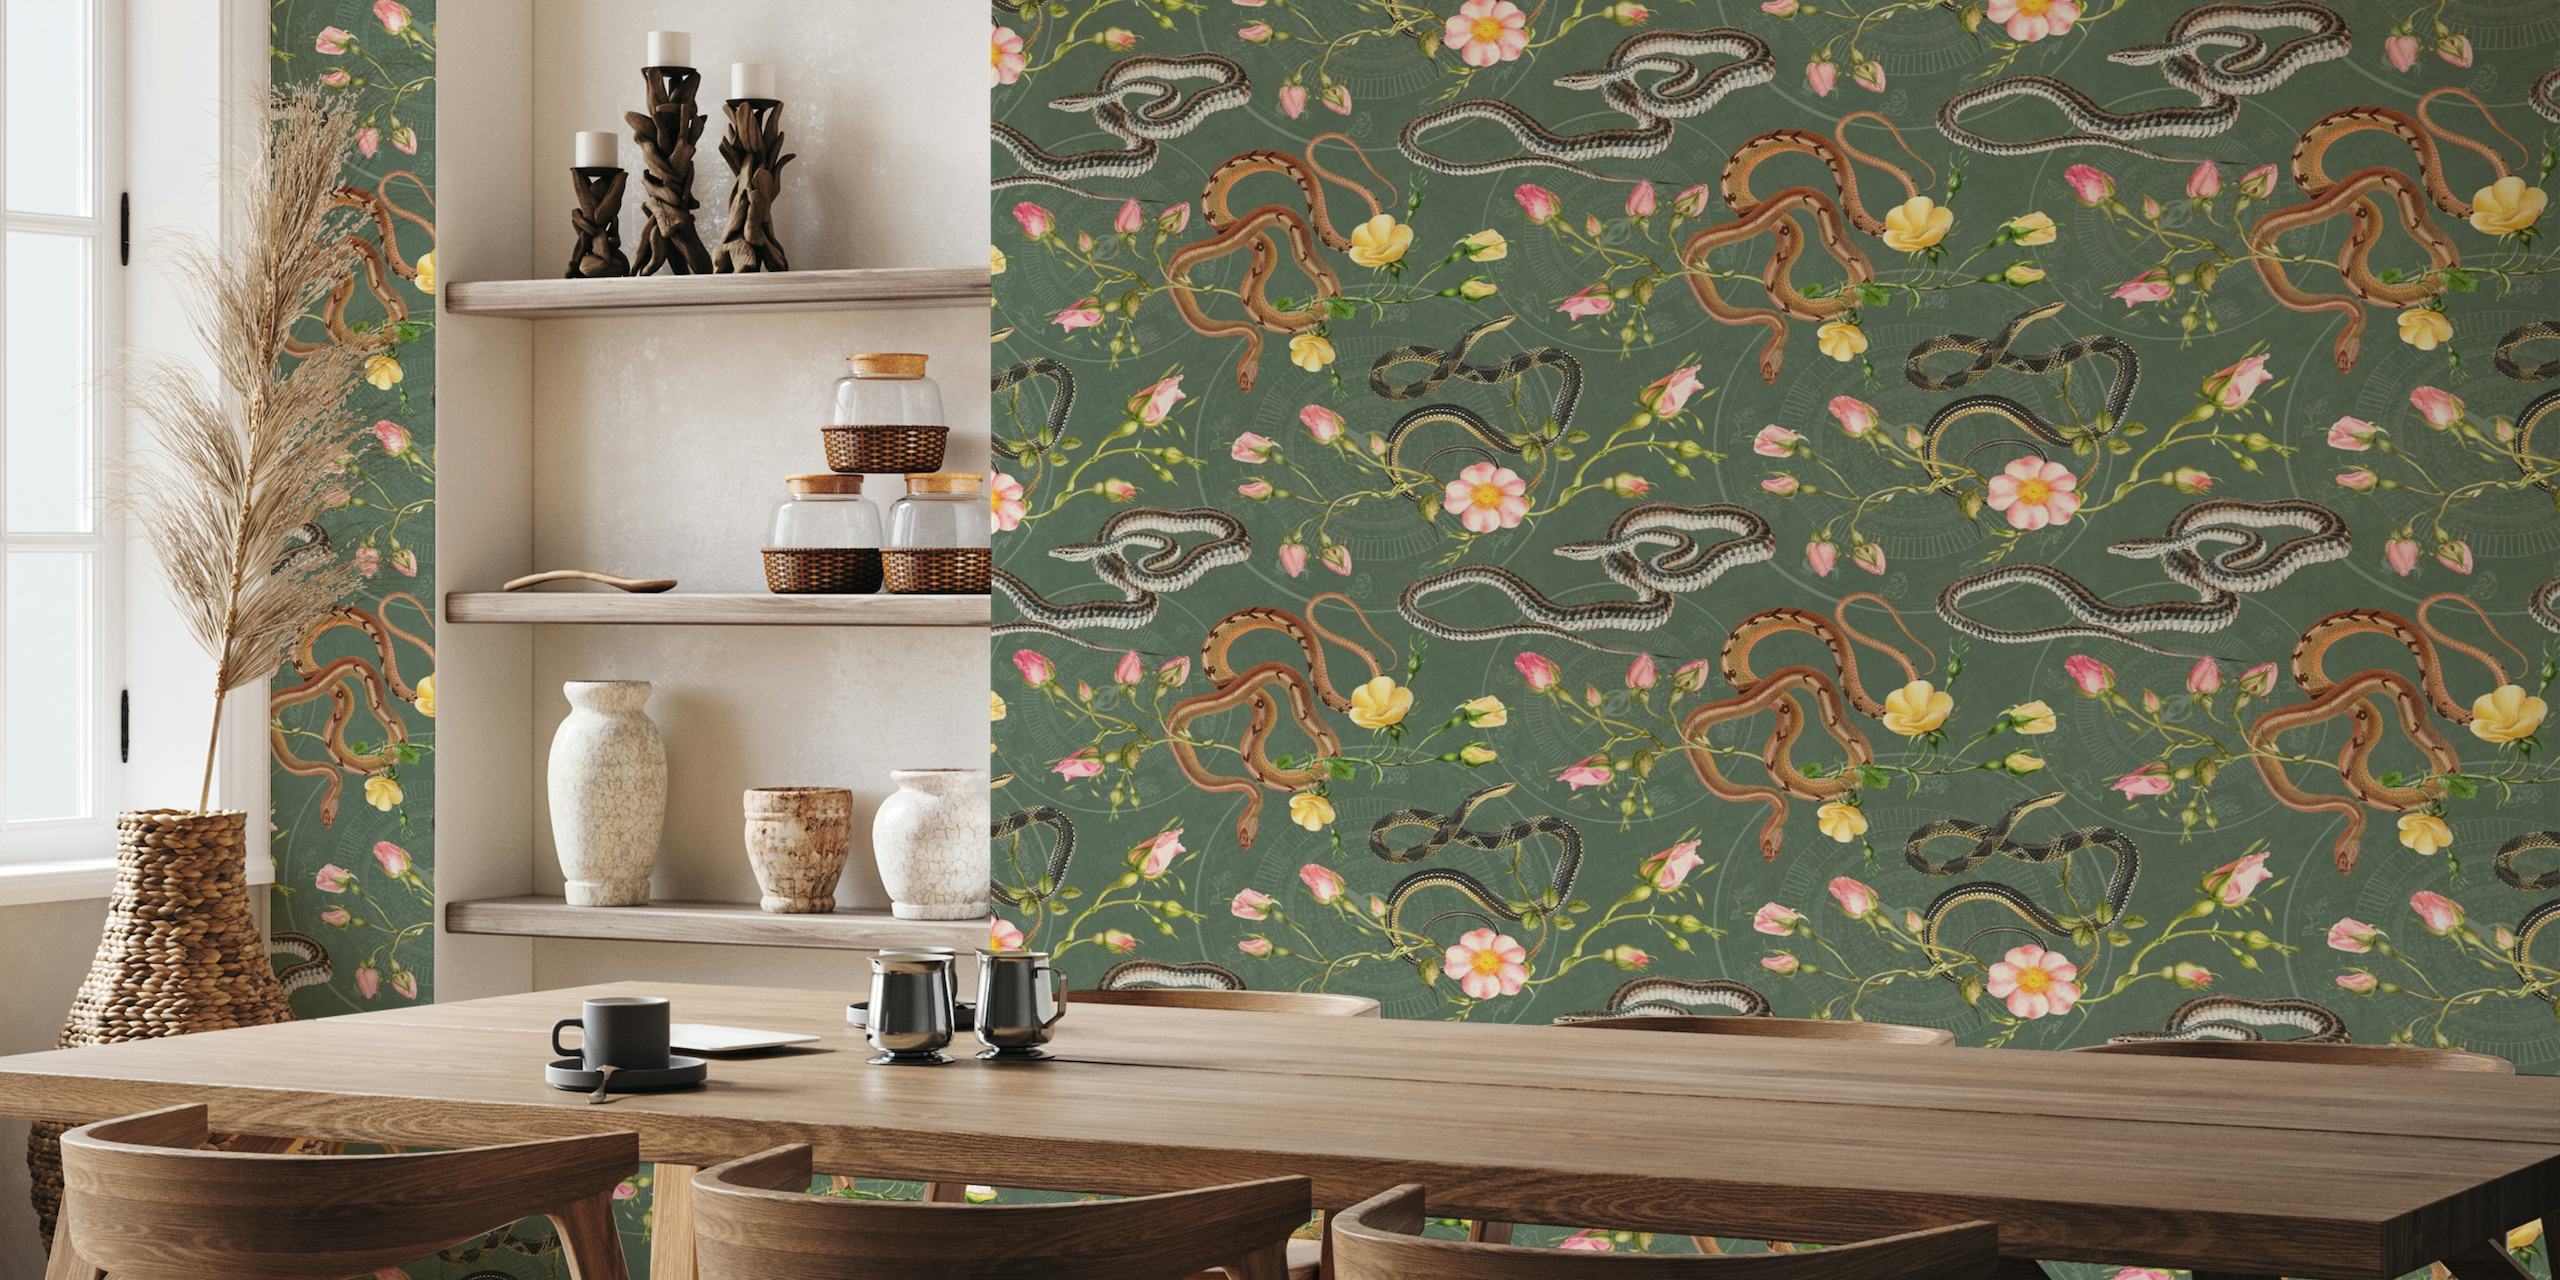 Olive green wall mural featuring snakes, roses, and elements of the Chinese calendar